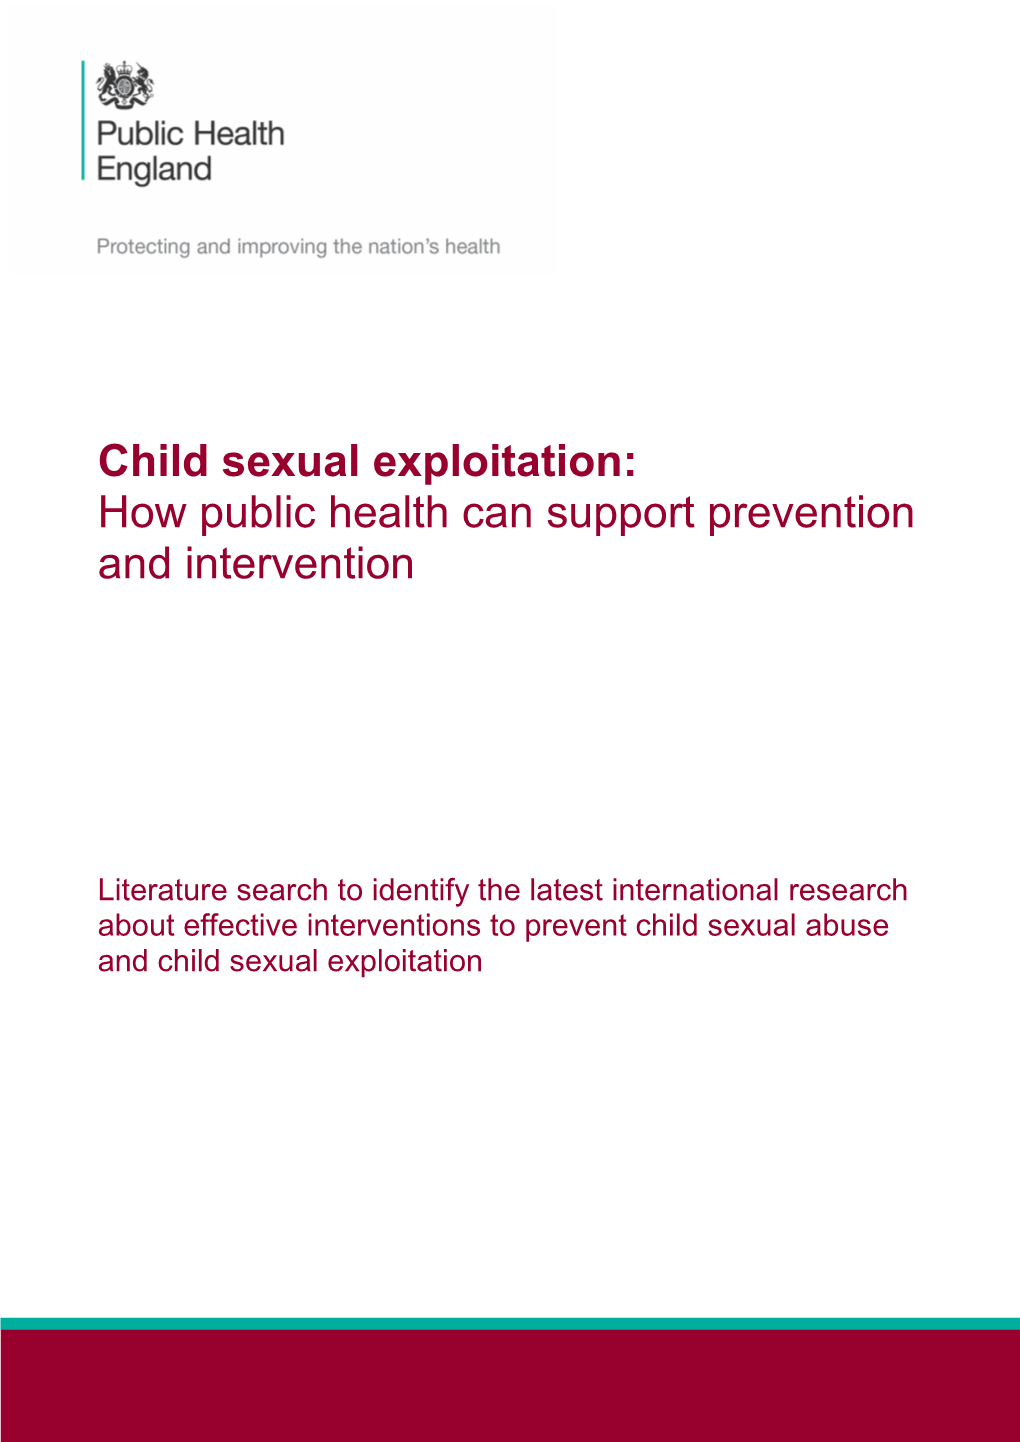 Child Sexual Exploitation: How Public Health Can Support Prevention and Intervention